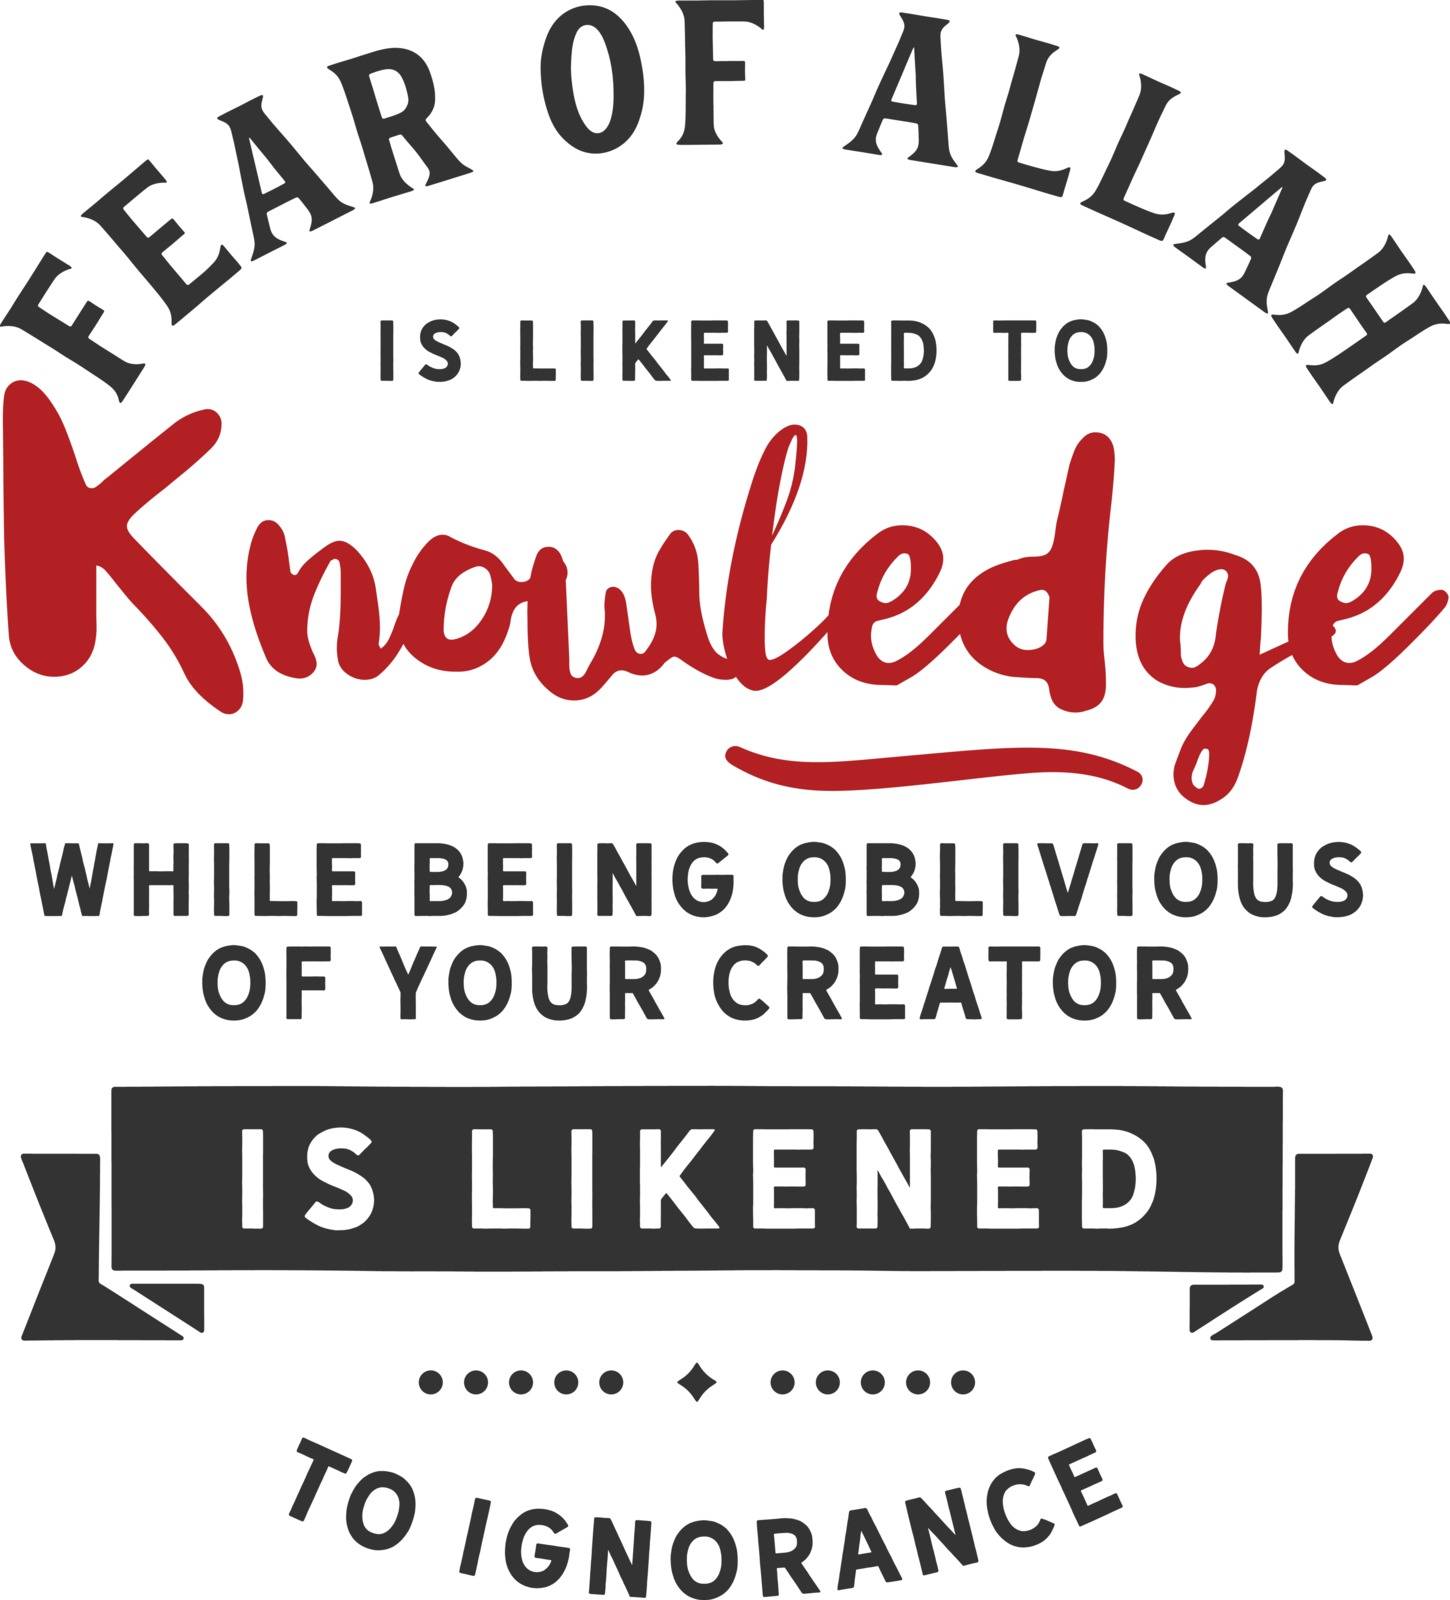 Fear of Allah is likened to knowledge by teguh_jam@yahoo.com